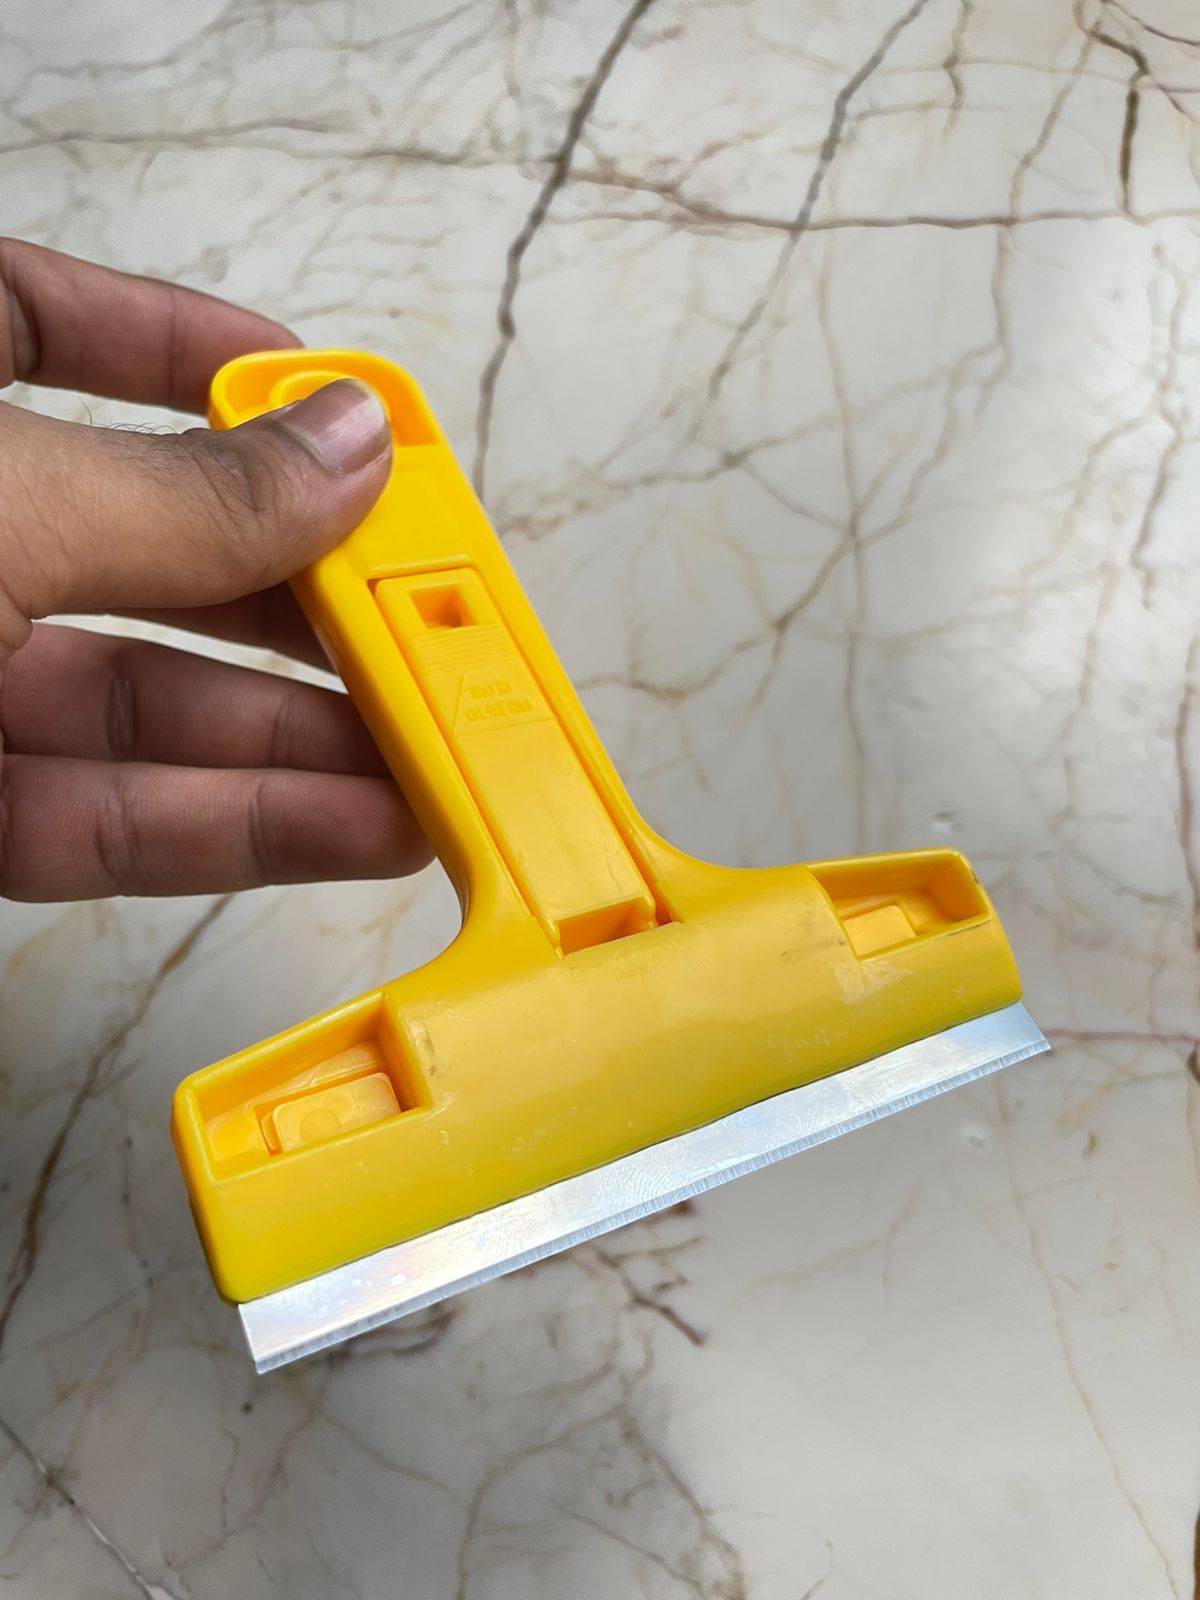 Professional Resin Floor Scrapper with extra blades